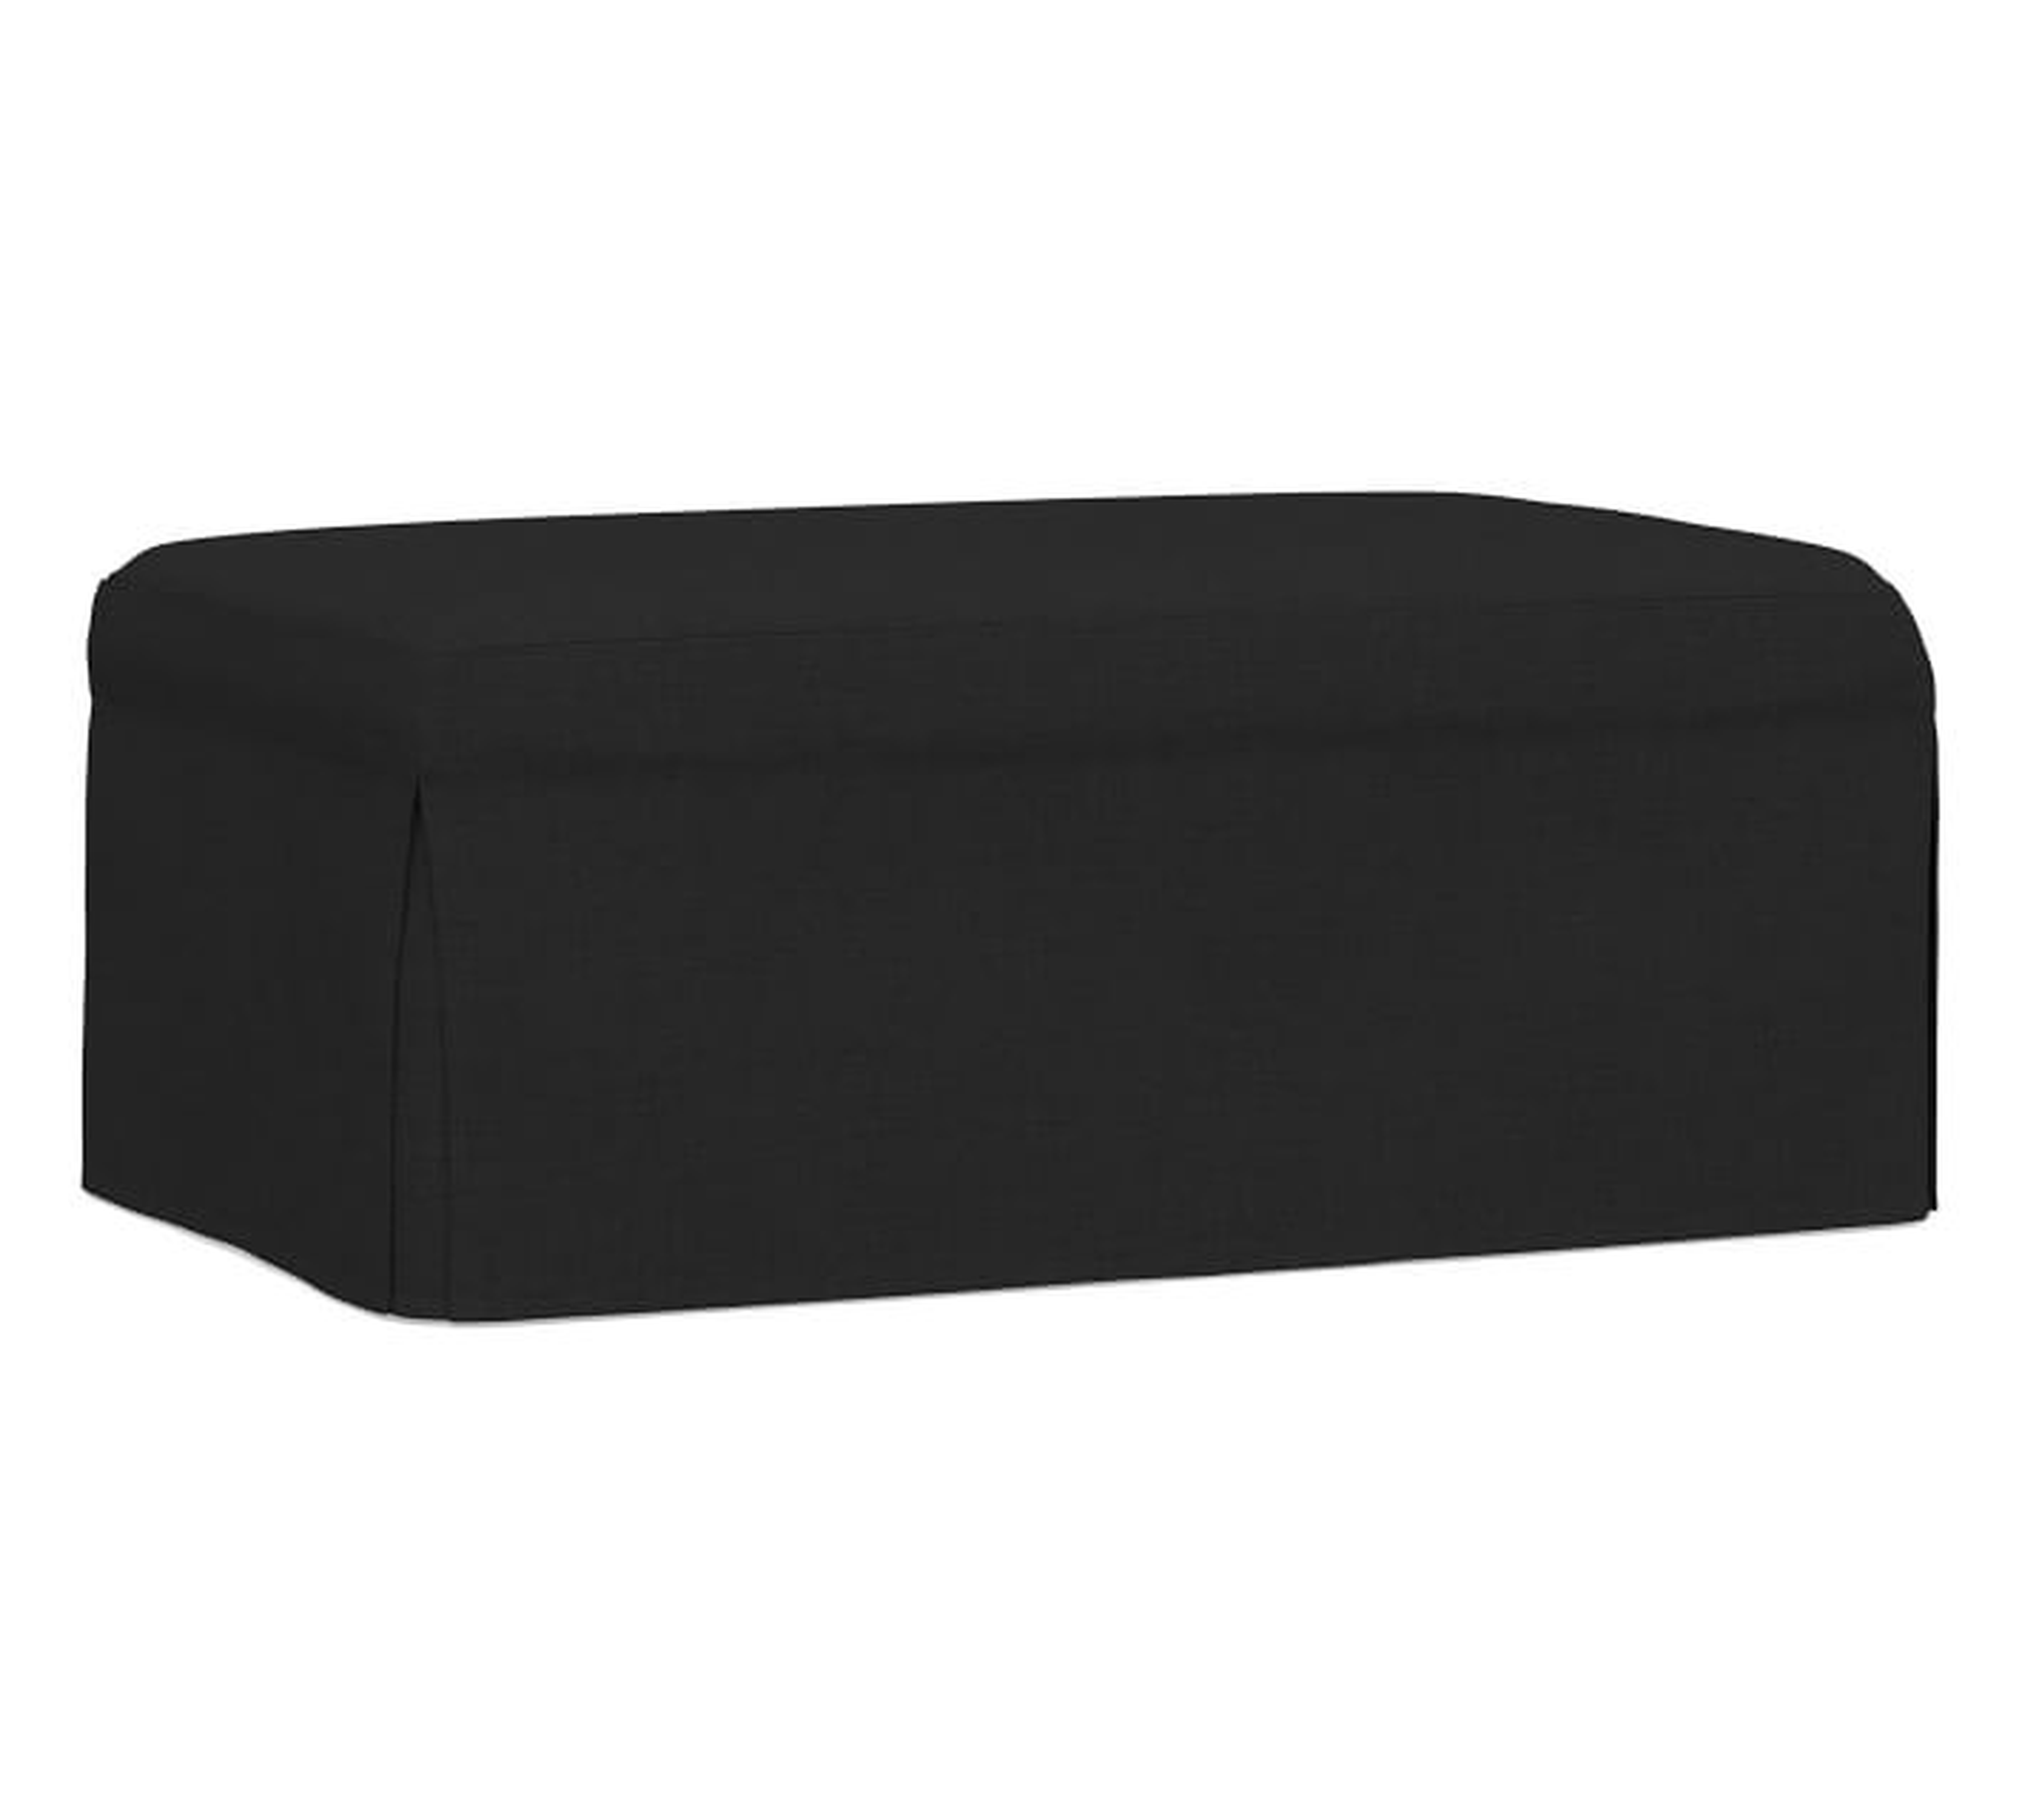 Sullivan Slipcovered Deep Seat Ottoman, Down Blend Wrapped Cushions, Textured Basketweave Black - Pottery Barn